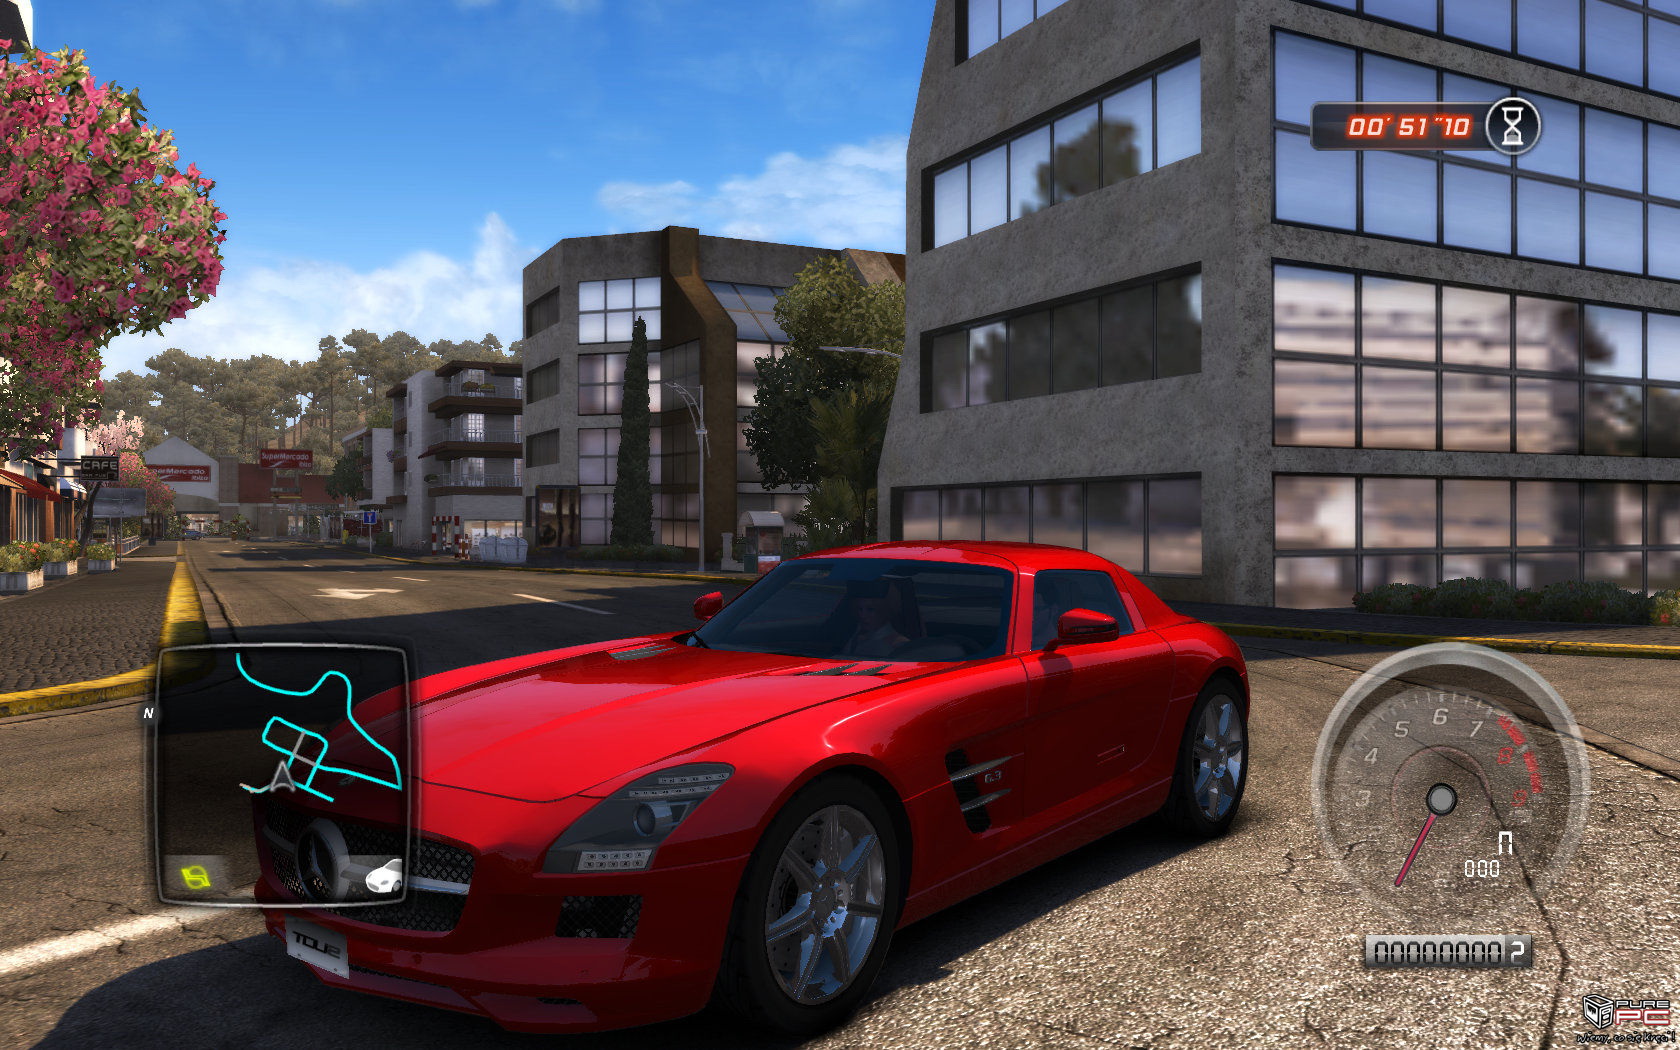 Recenzja Test Drive Unlimited 2 Sims & Cars (strona 3